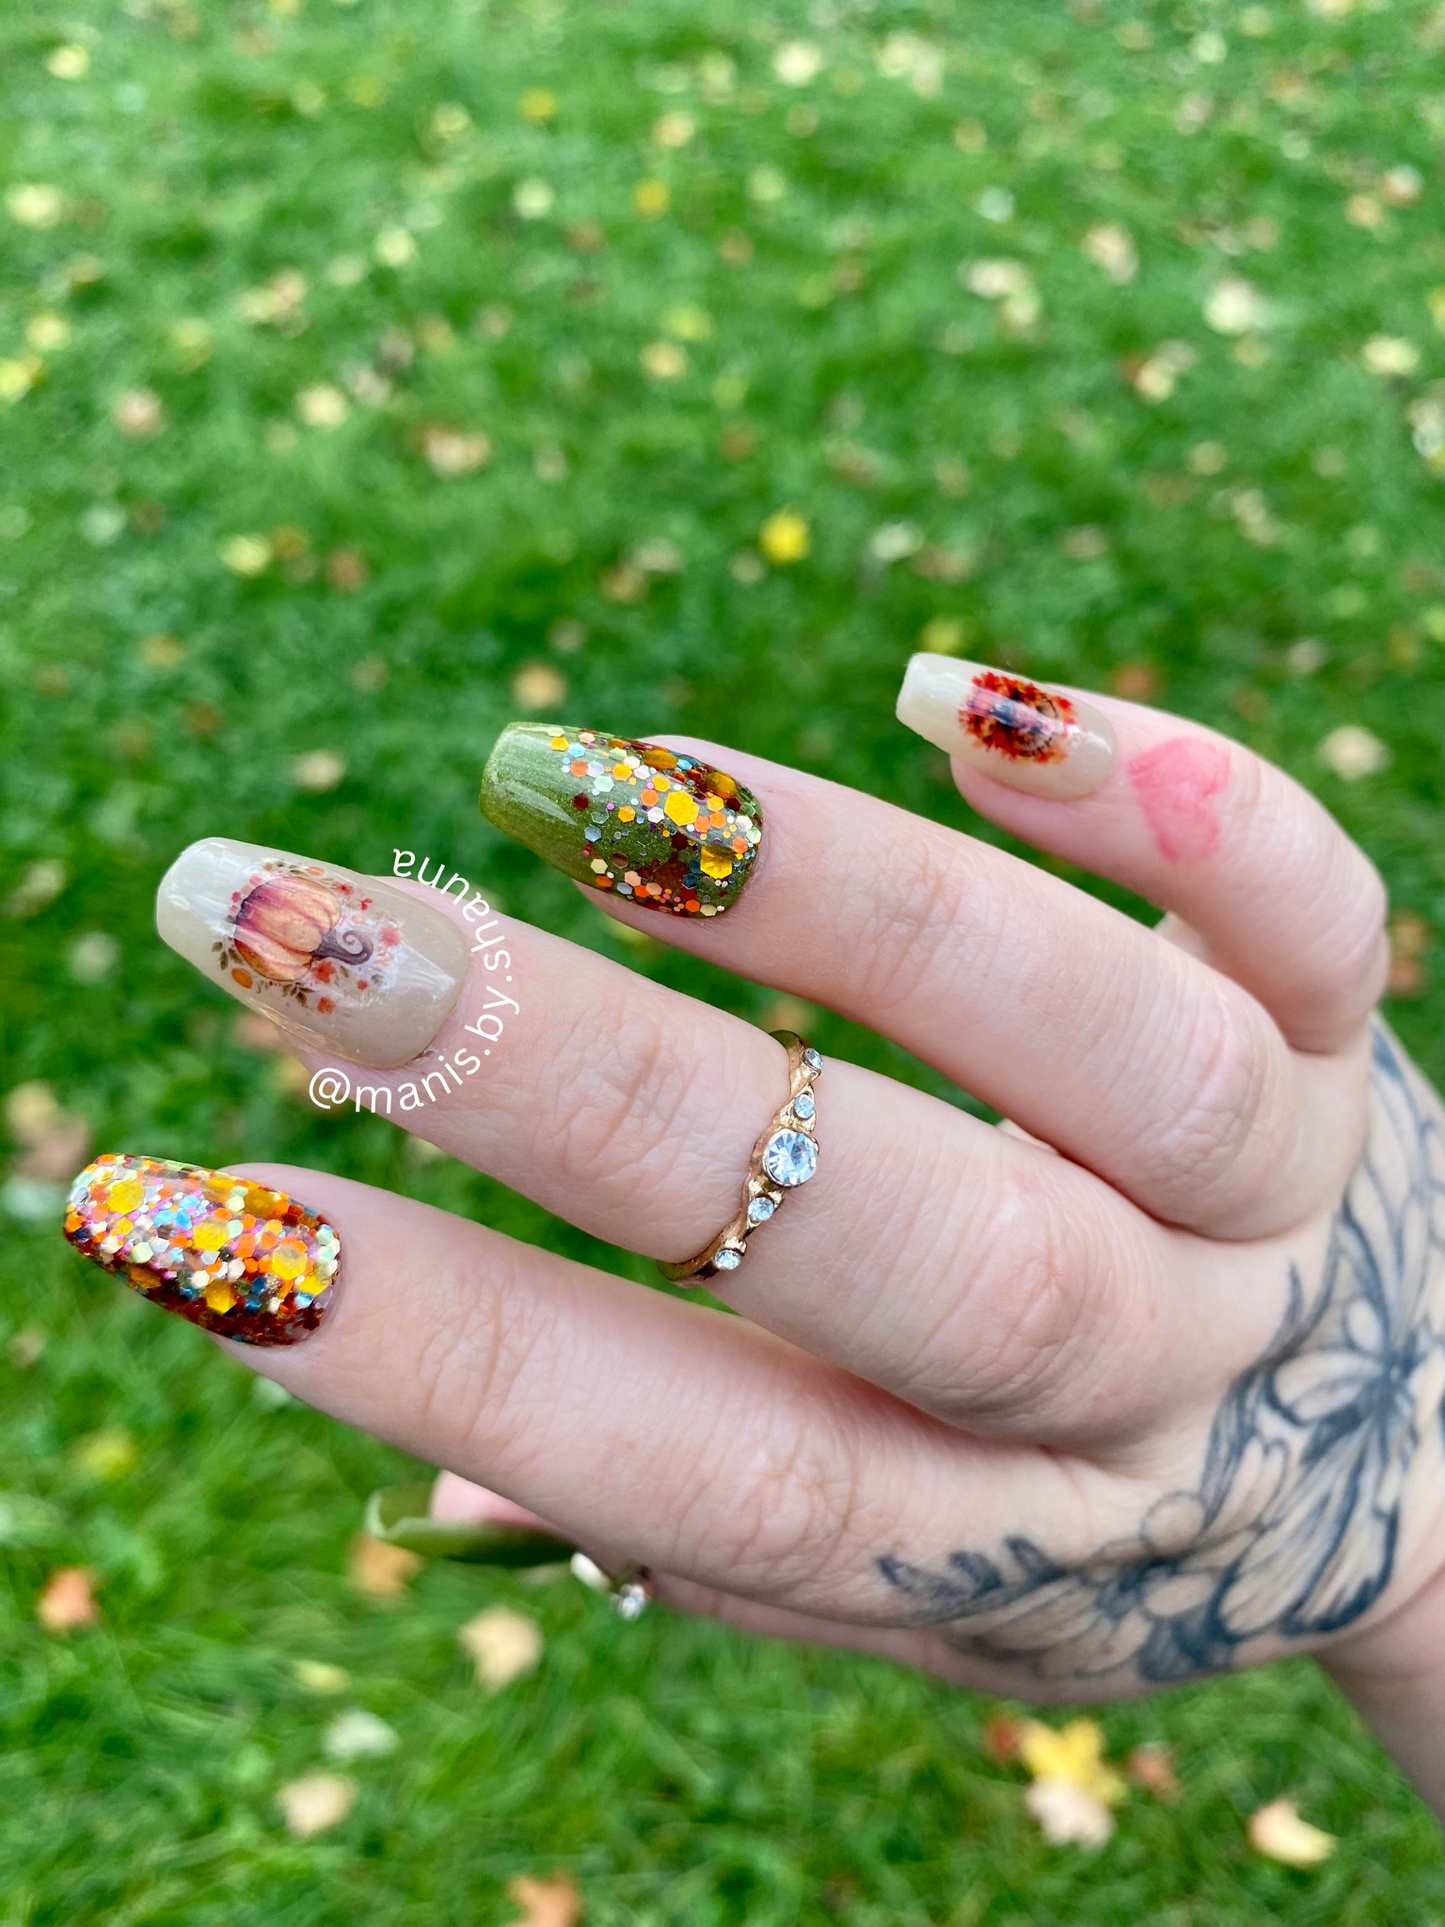 Happy Thanksgiving- Decals For Nails